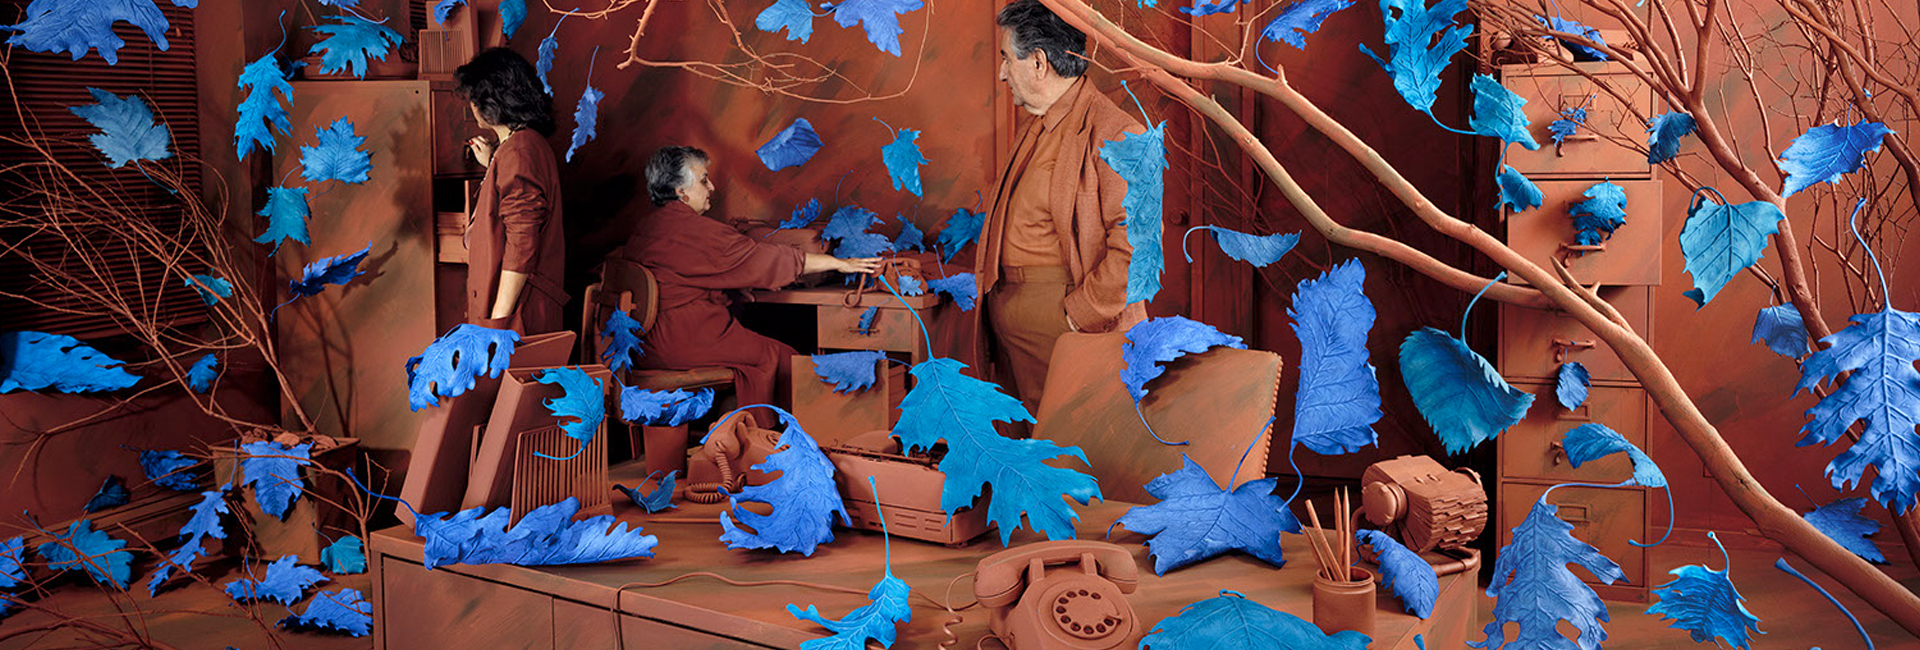 Sandy Skoglund, A Breeze at Work, ©1987, Cibachrome print, on loan from the Faulconer Gallery, Grinnell College Art Collection